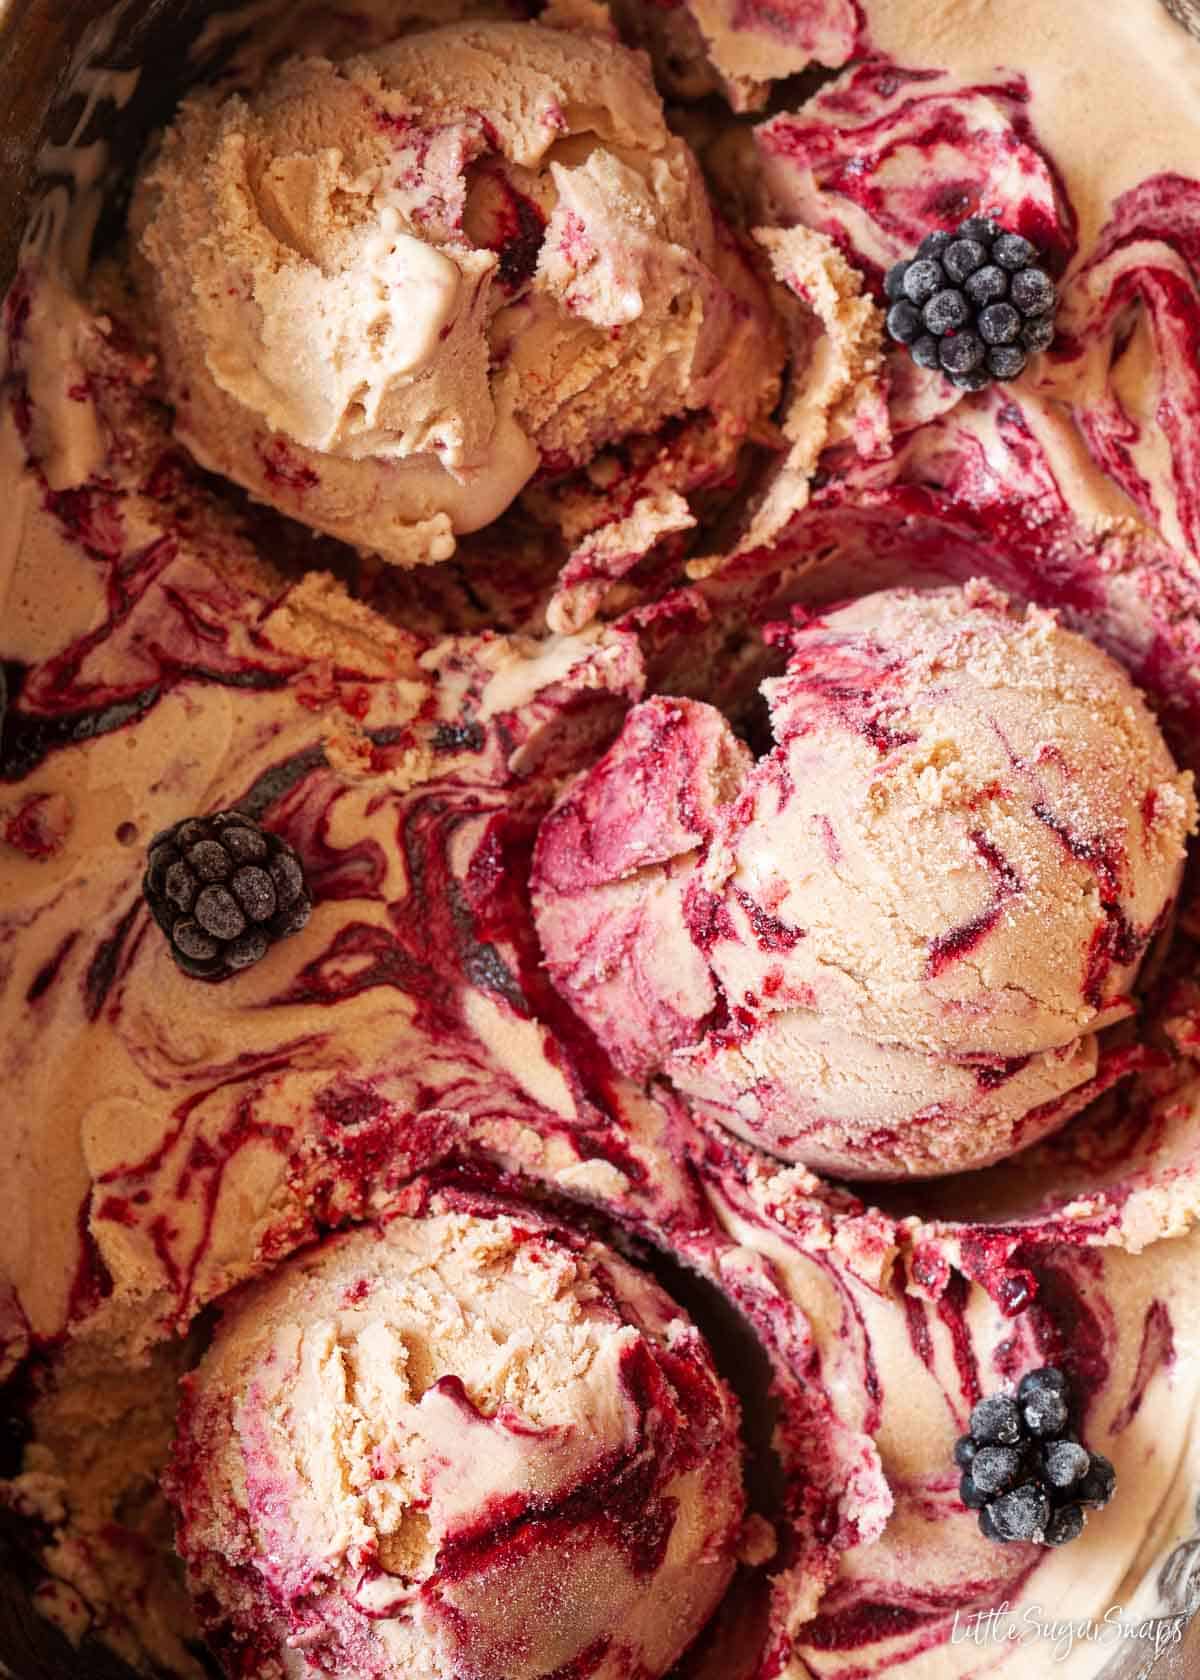 Close-up of chocolate ice cream with Nutella and blackberry ripple.